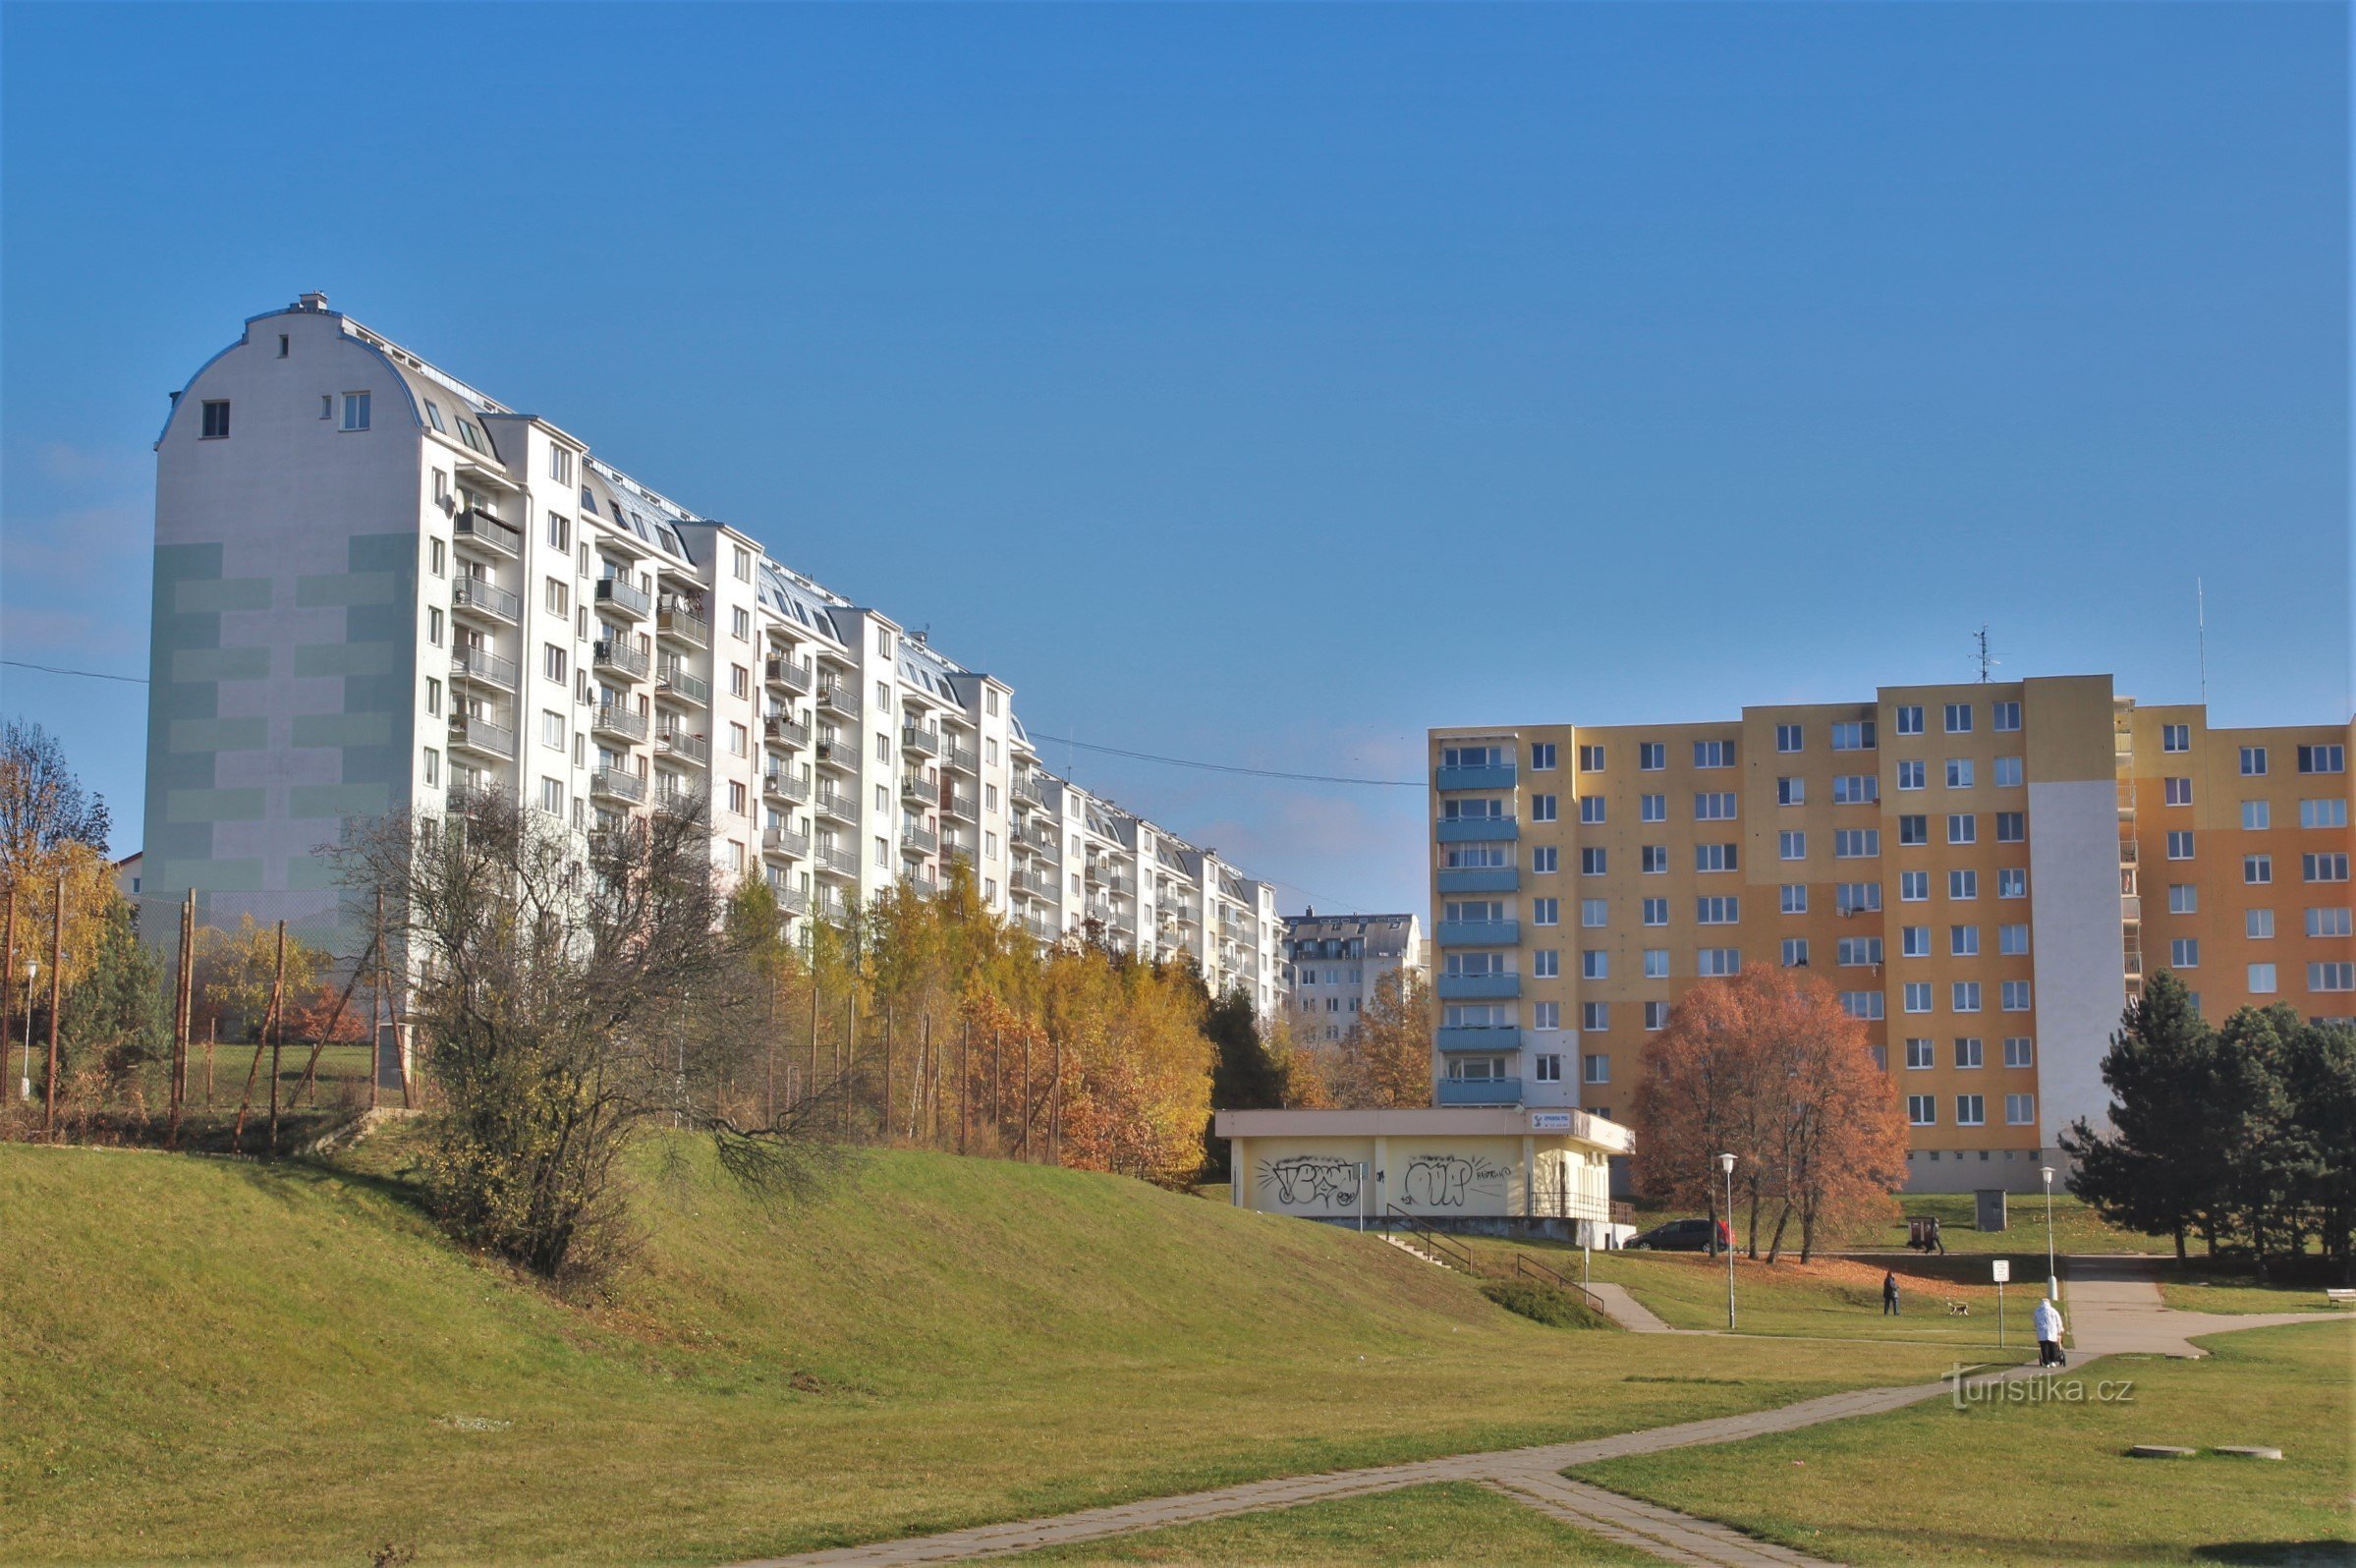 The beginning of the route leads through the Lišeň housing estate